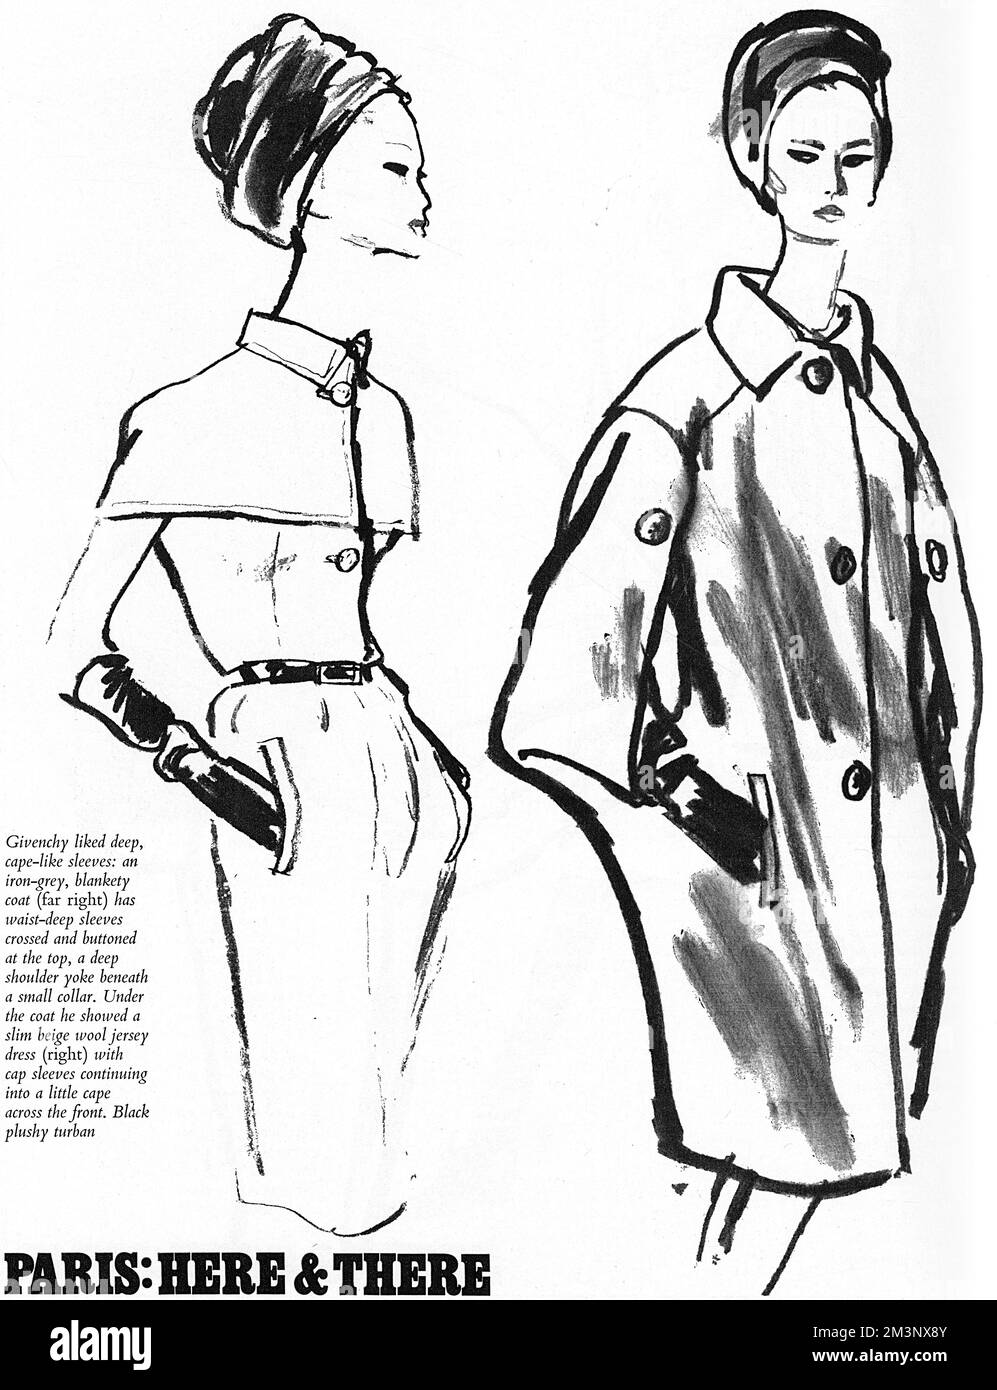 How to draw draperies and folds on clothes|Review from Fashion Illustration  School Fantasy Room Online